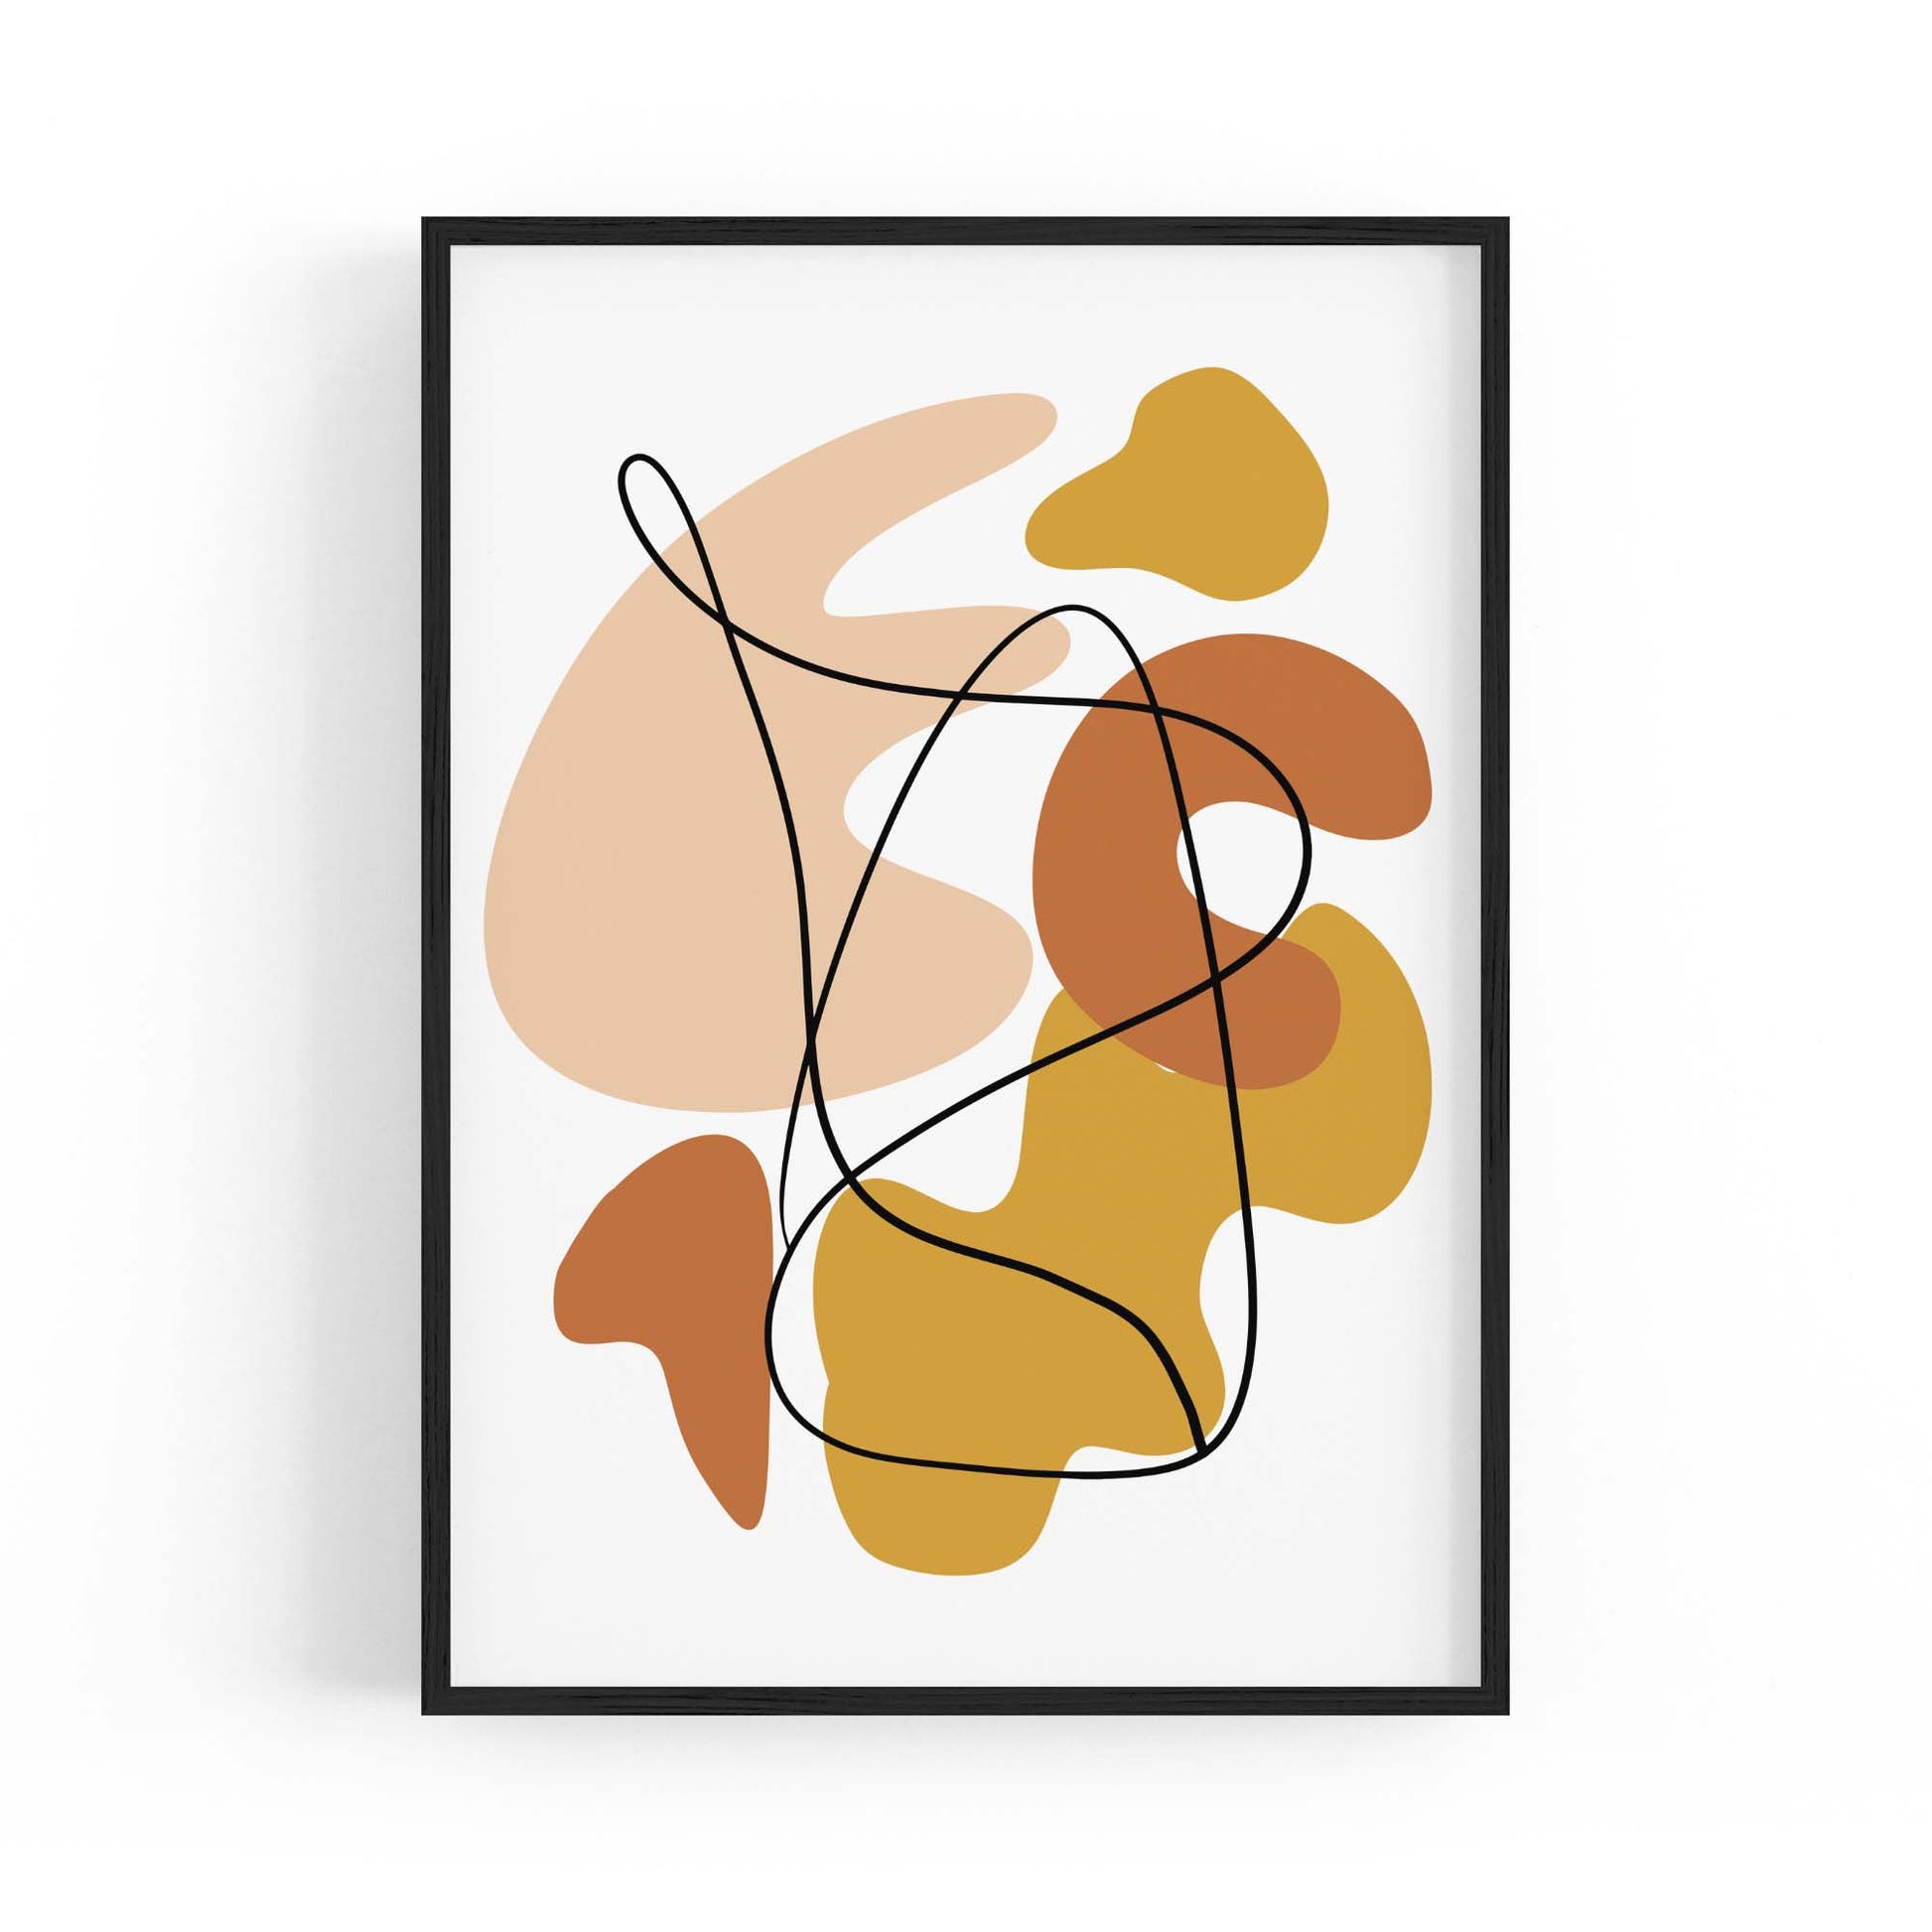 Minimal Autumn Abstract Shapes Wall Art #2 - The Affordable Art Company